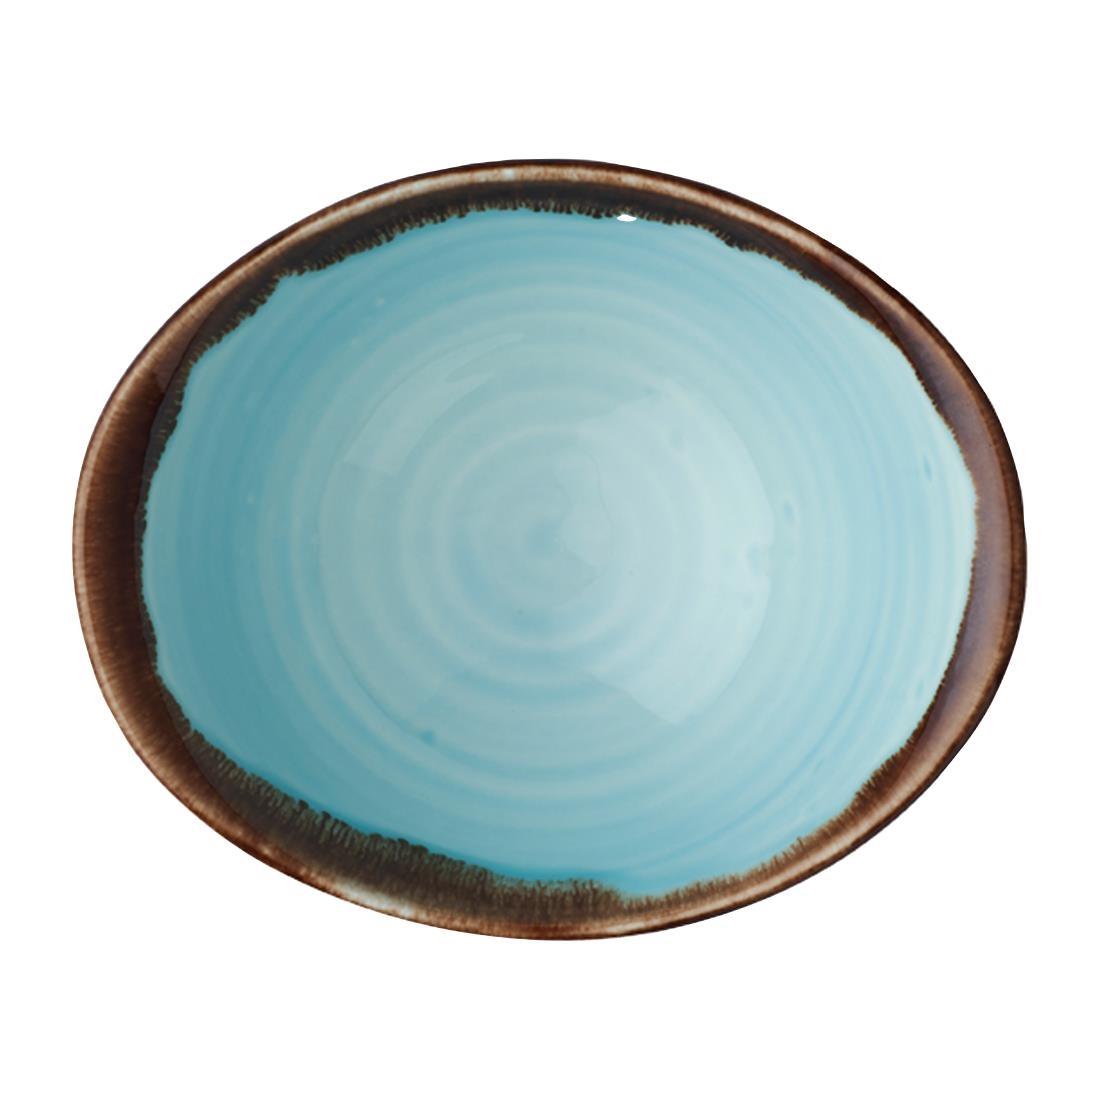 Dudson Harvest Deep Bowls Turquoise 174mm (Pack of 6) - FX156  - 1